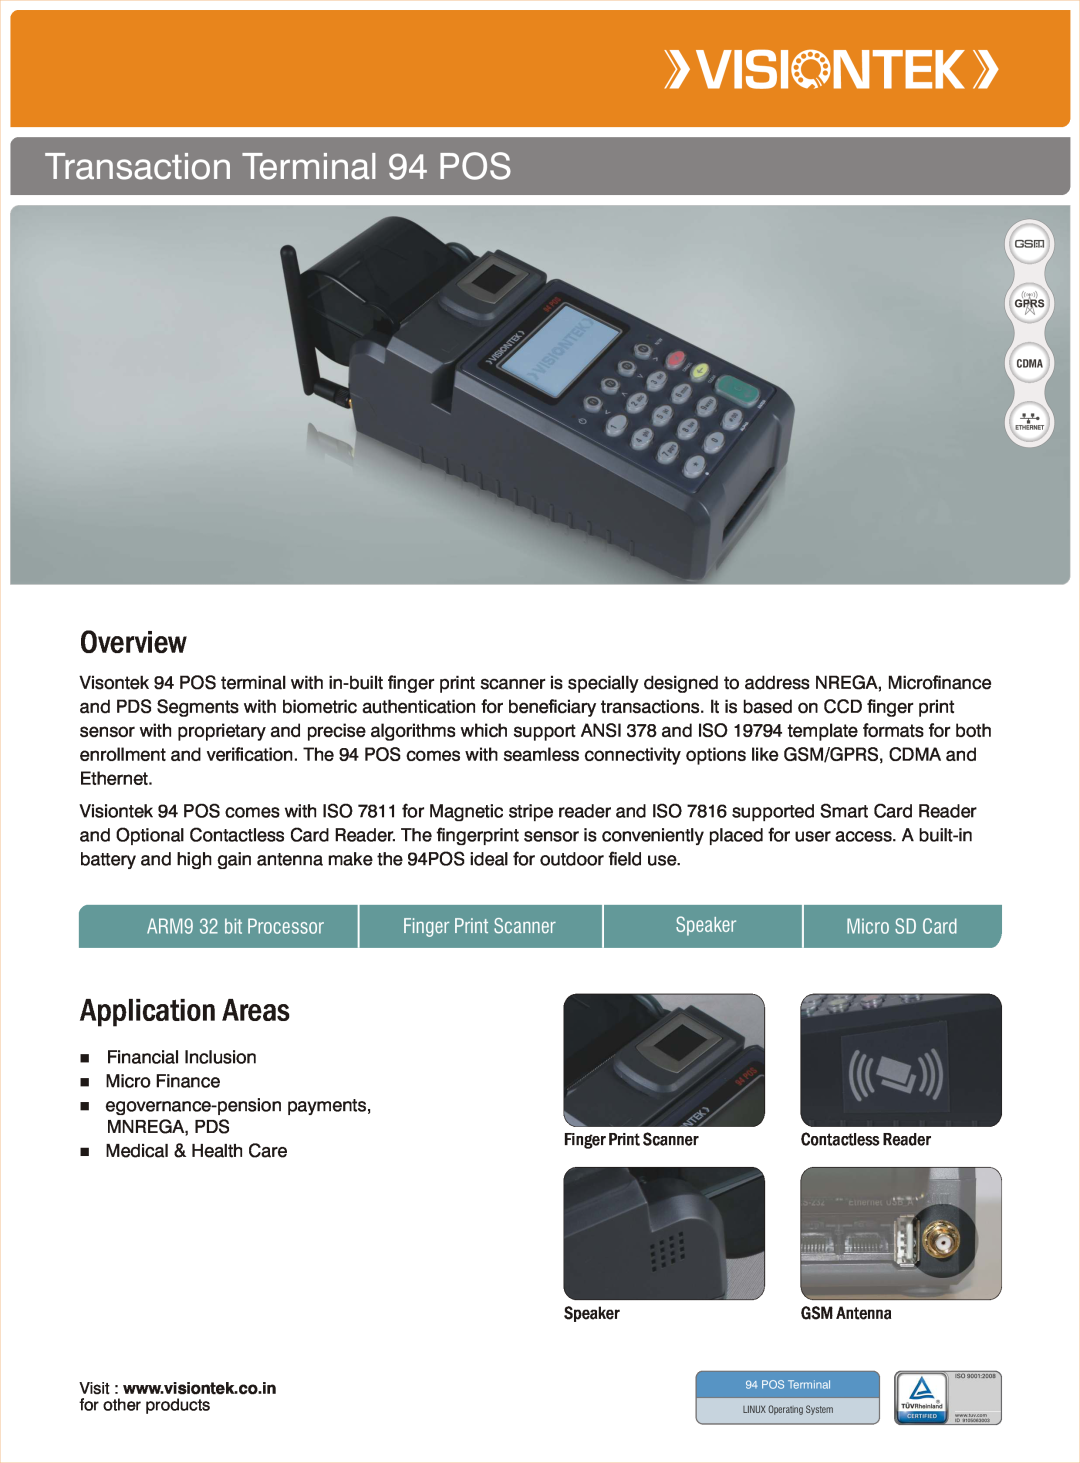 VisionTek ISO 7811 manual Overview, Application Areas, Transaction Terminal 94 POS, ARM9 32 bit Processor, Speaker 